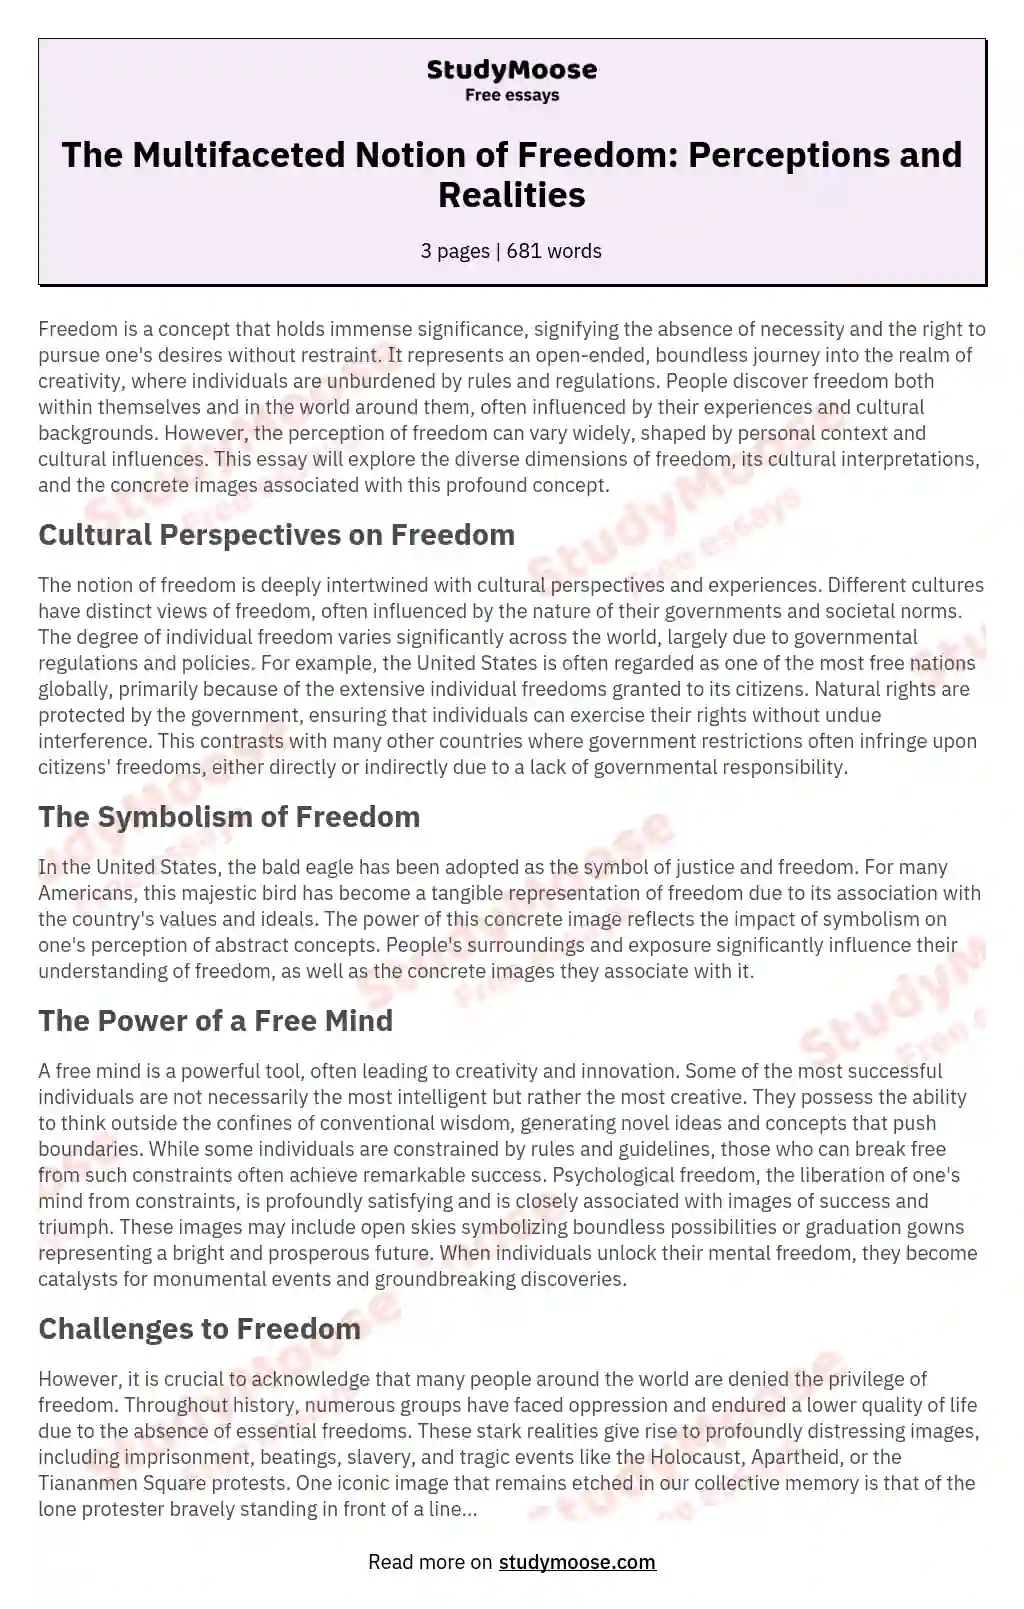 The Multifaceted Notion of Freedom: Perceptions and Realities essay